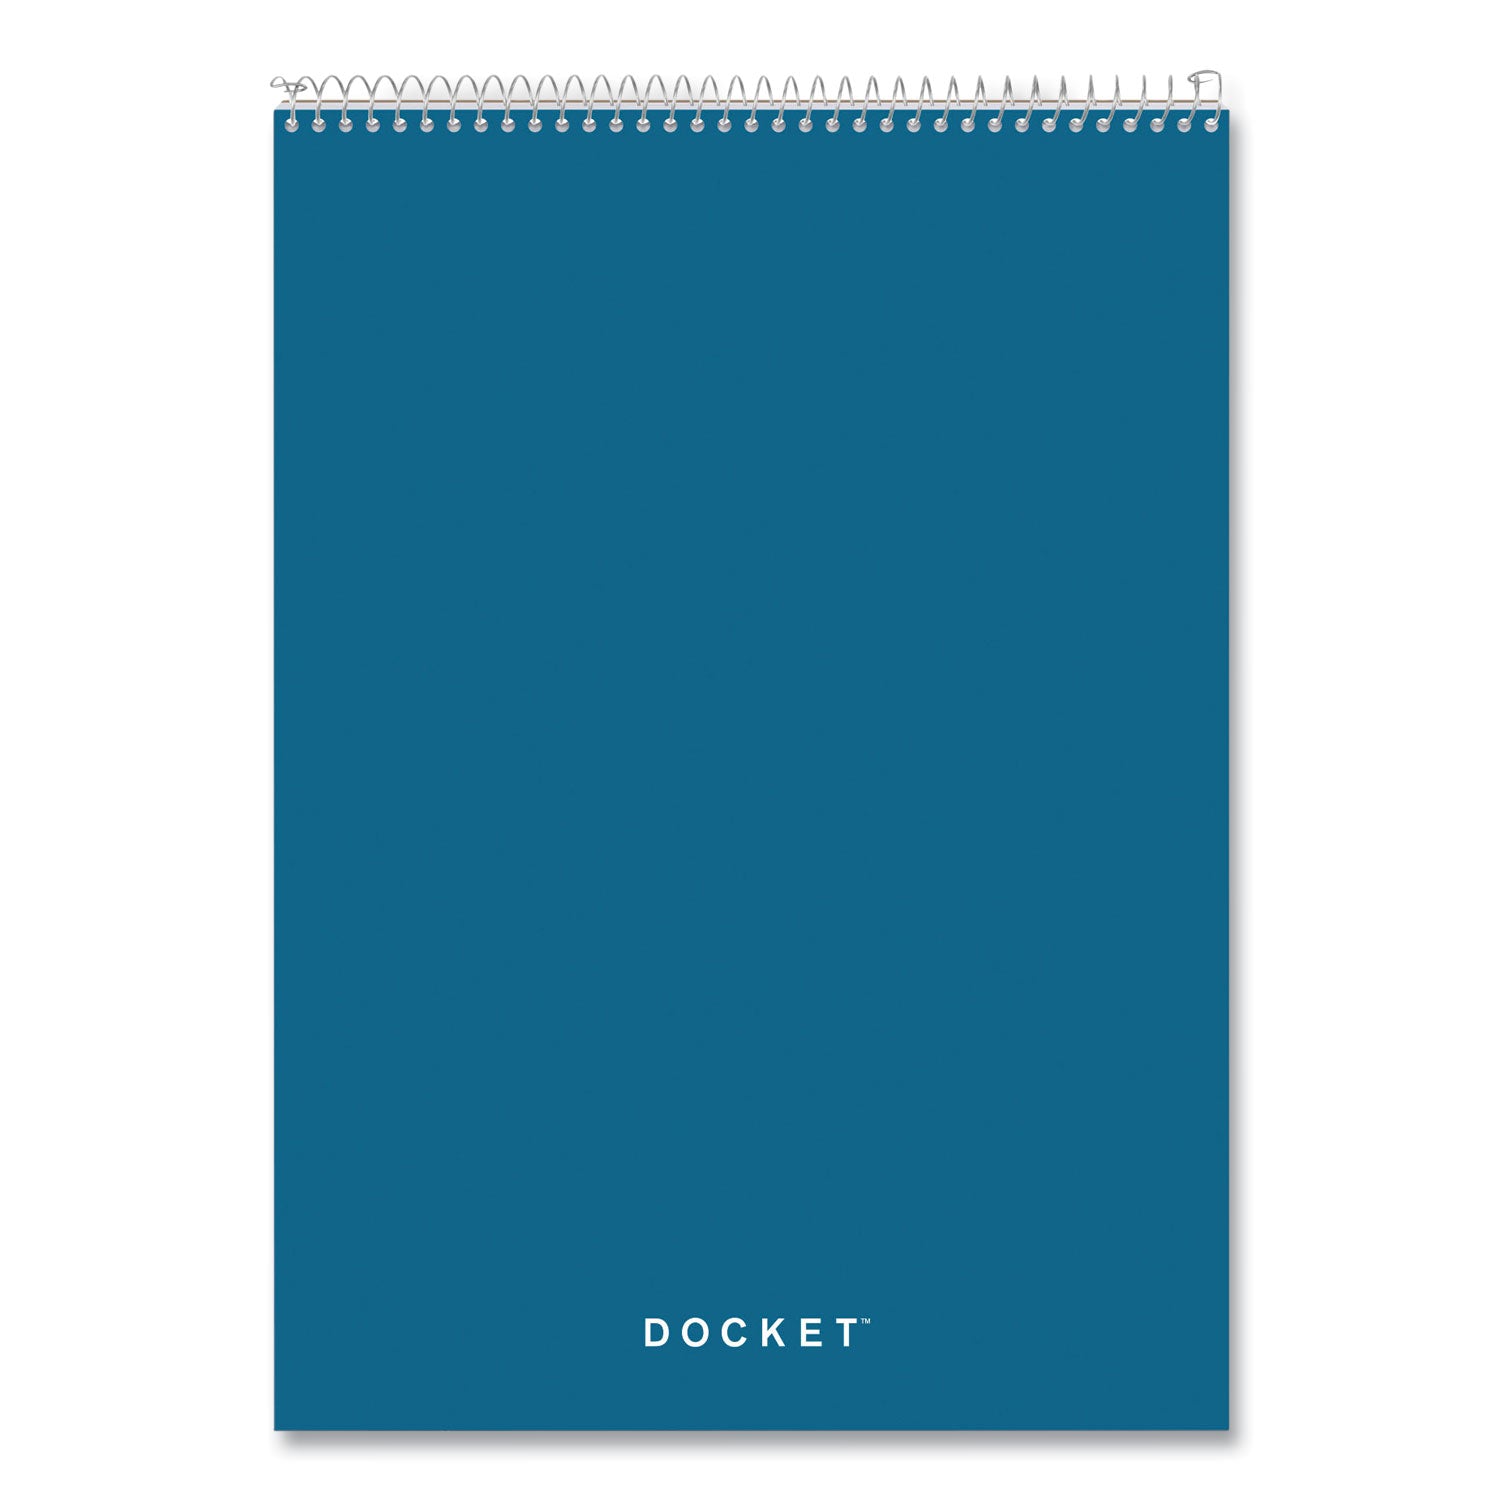 Docket Ruled Wirebound Pad with Cover, Wide/Legal Rule, Blue Cover, 70 White 8.5 x 11.75 Sheets - 